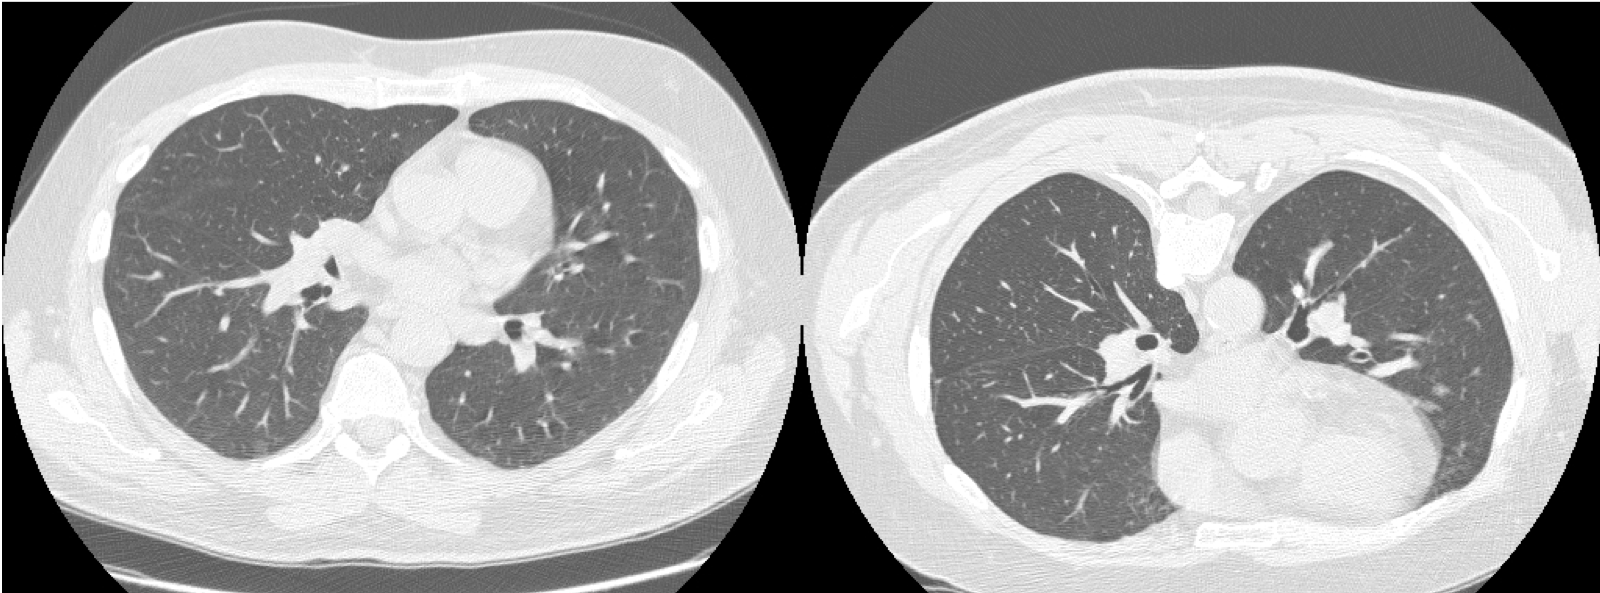 High resolution computed tomography of the lungs in the supine and prone positions demonstrating normal lung parenchyma.